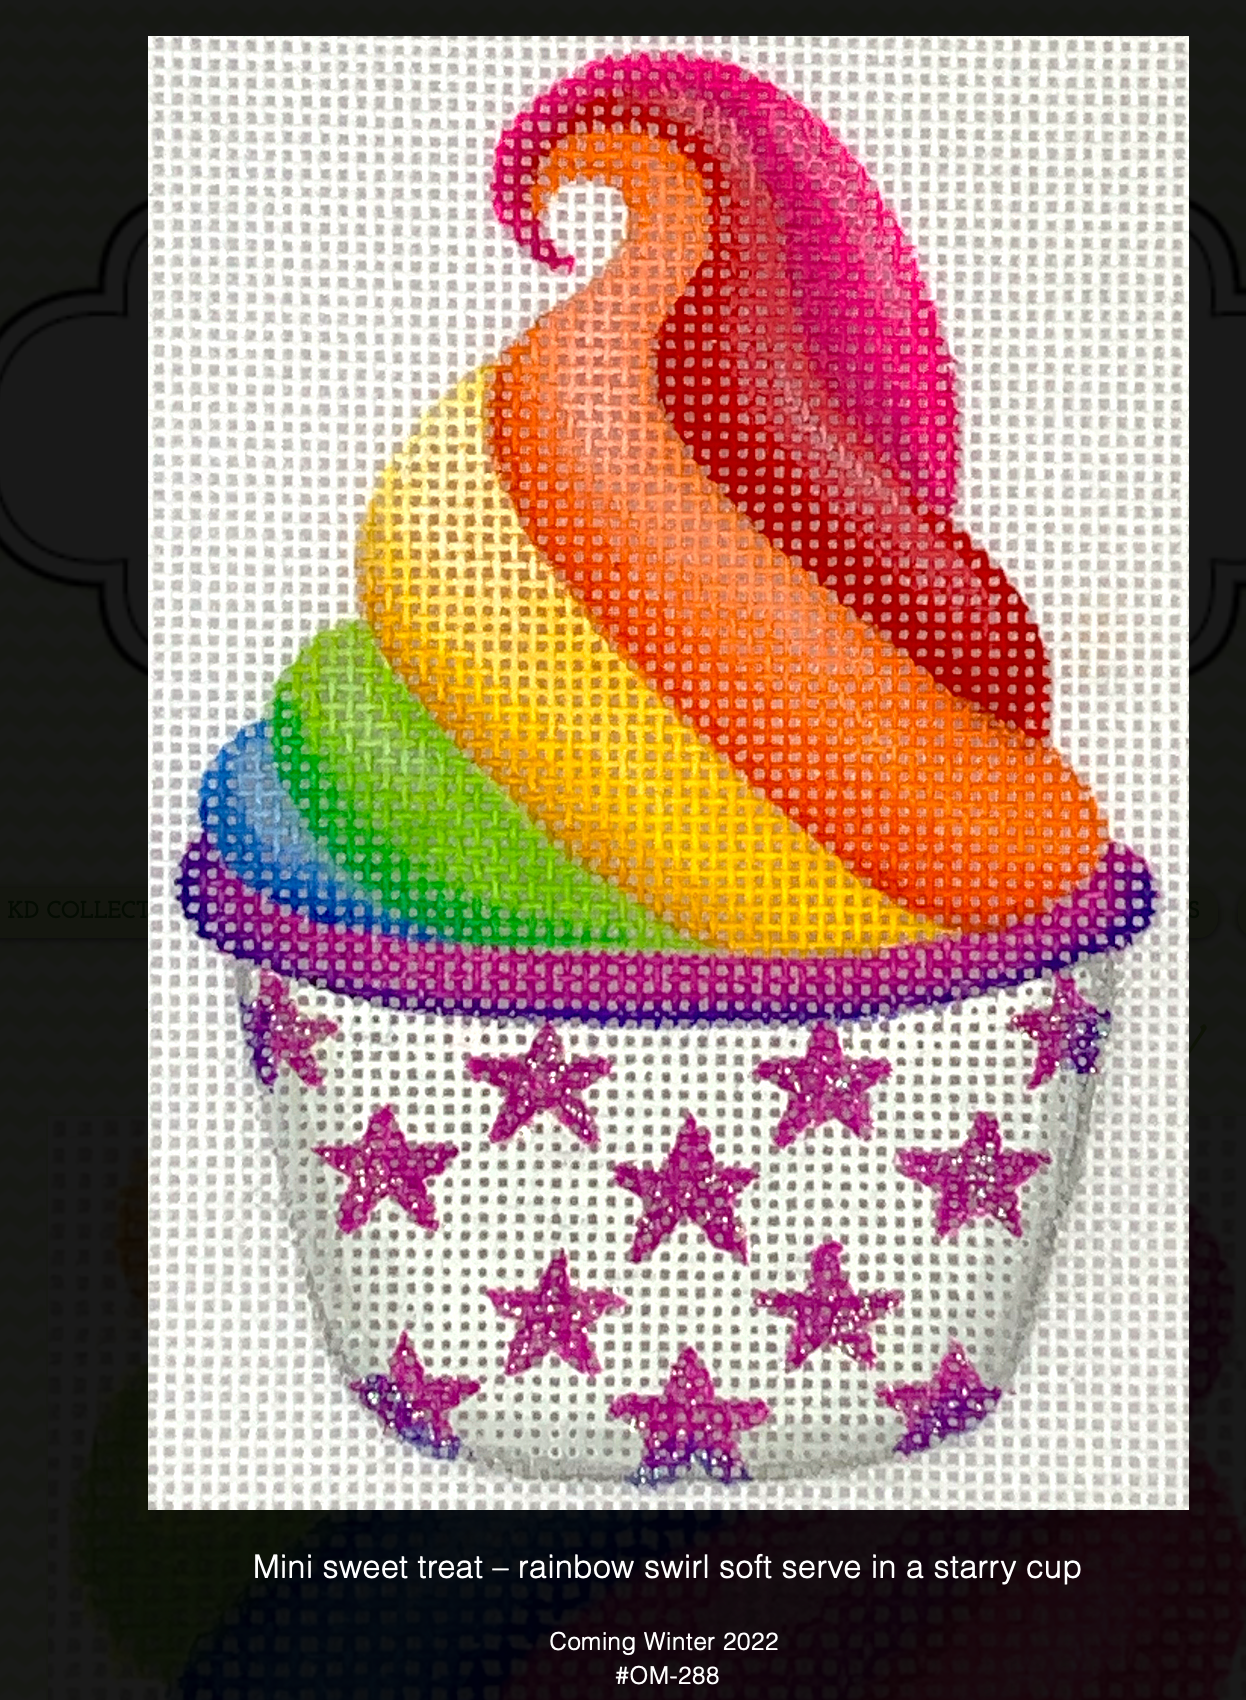 Kate Dickerson OM-288 Rainbow Swirl Soft Serve in Starry Cup